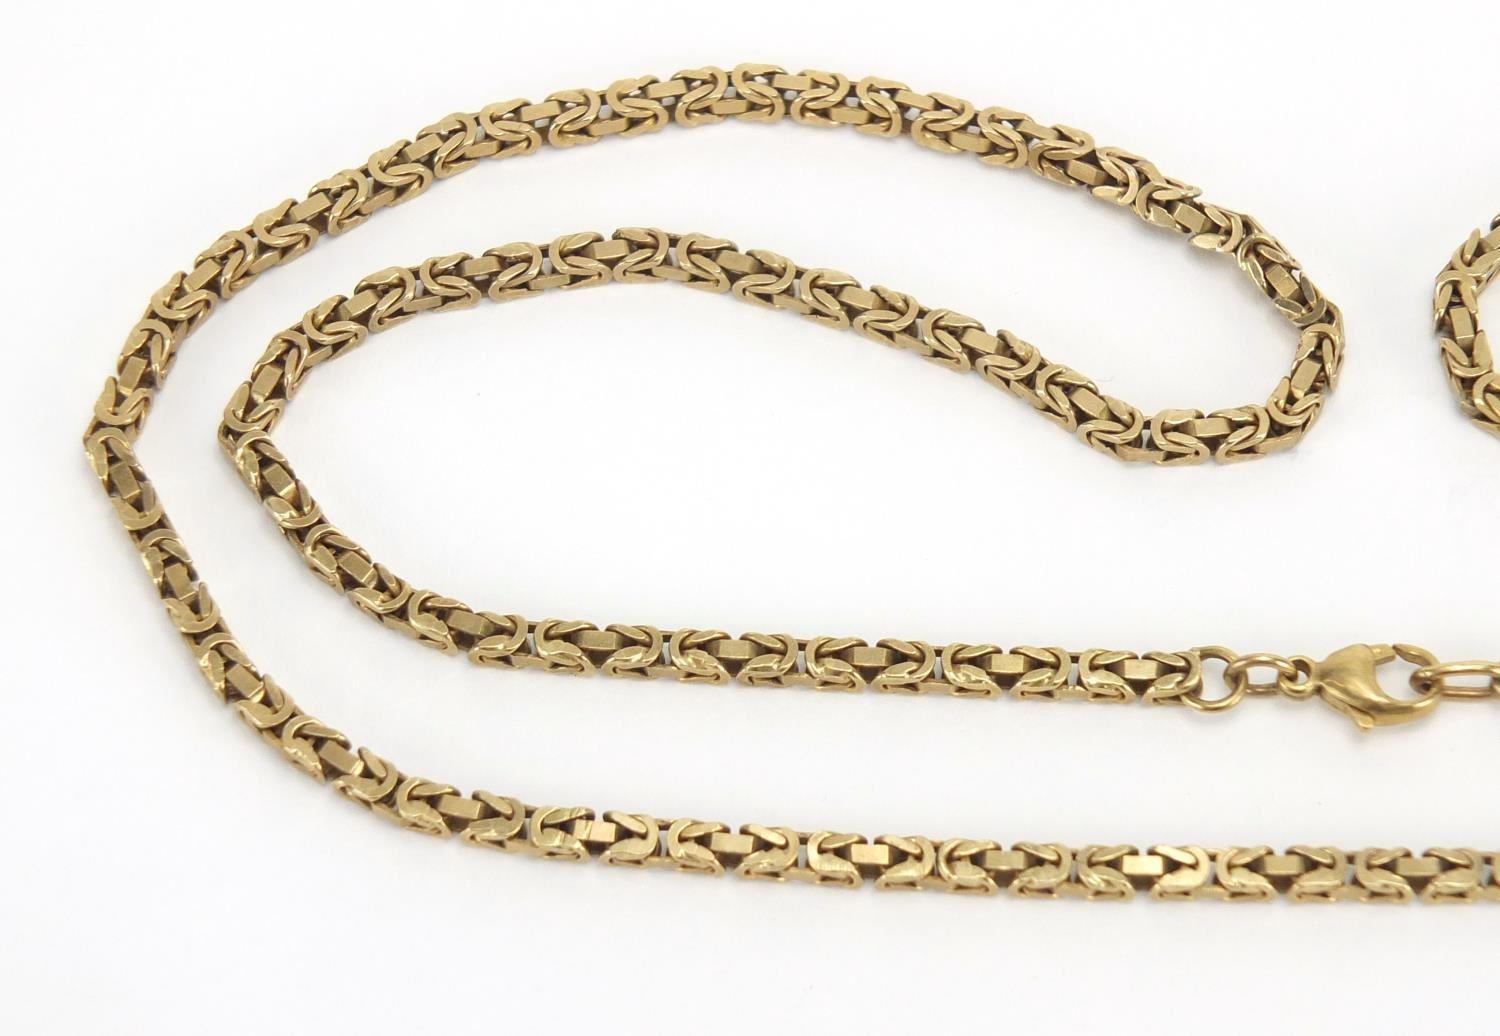 9ct gold Konigskette link necklace, 80cm in length, approximate weight 39.2g Further condition - Image 2 of 4